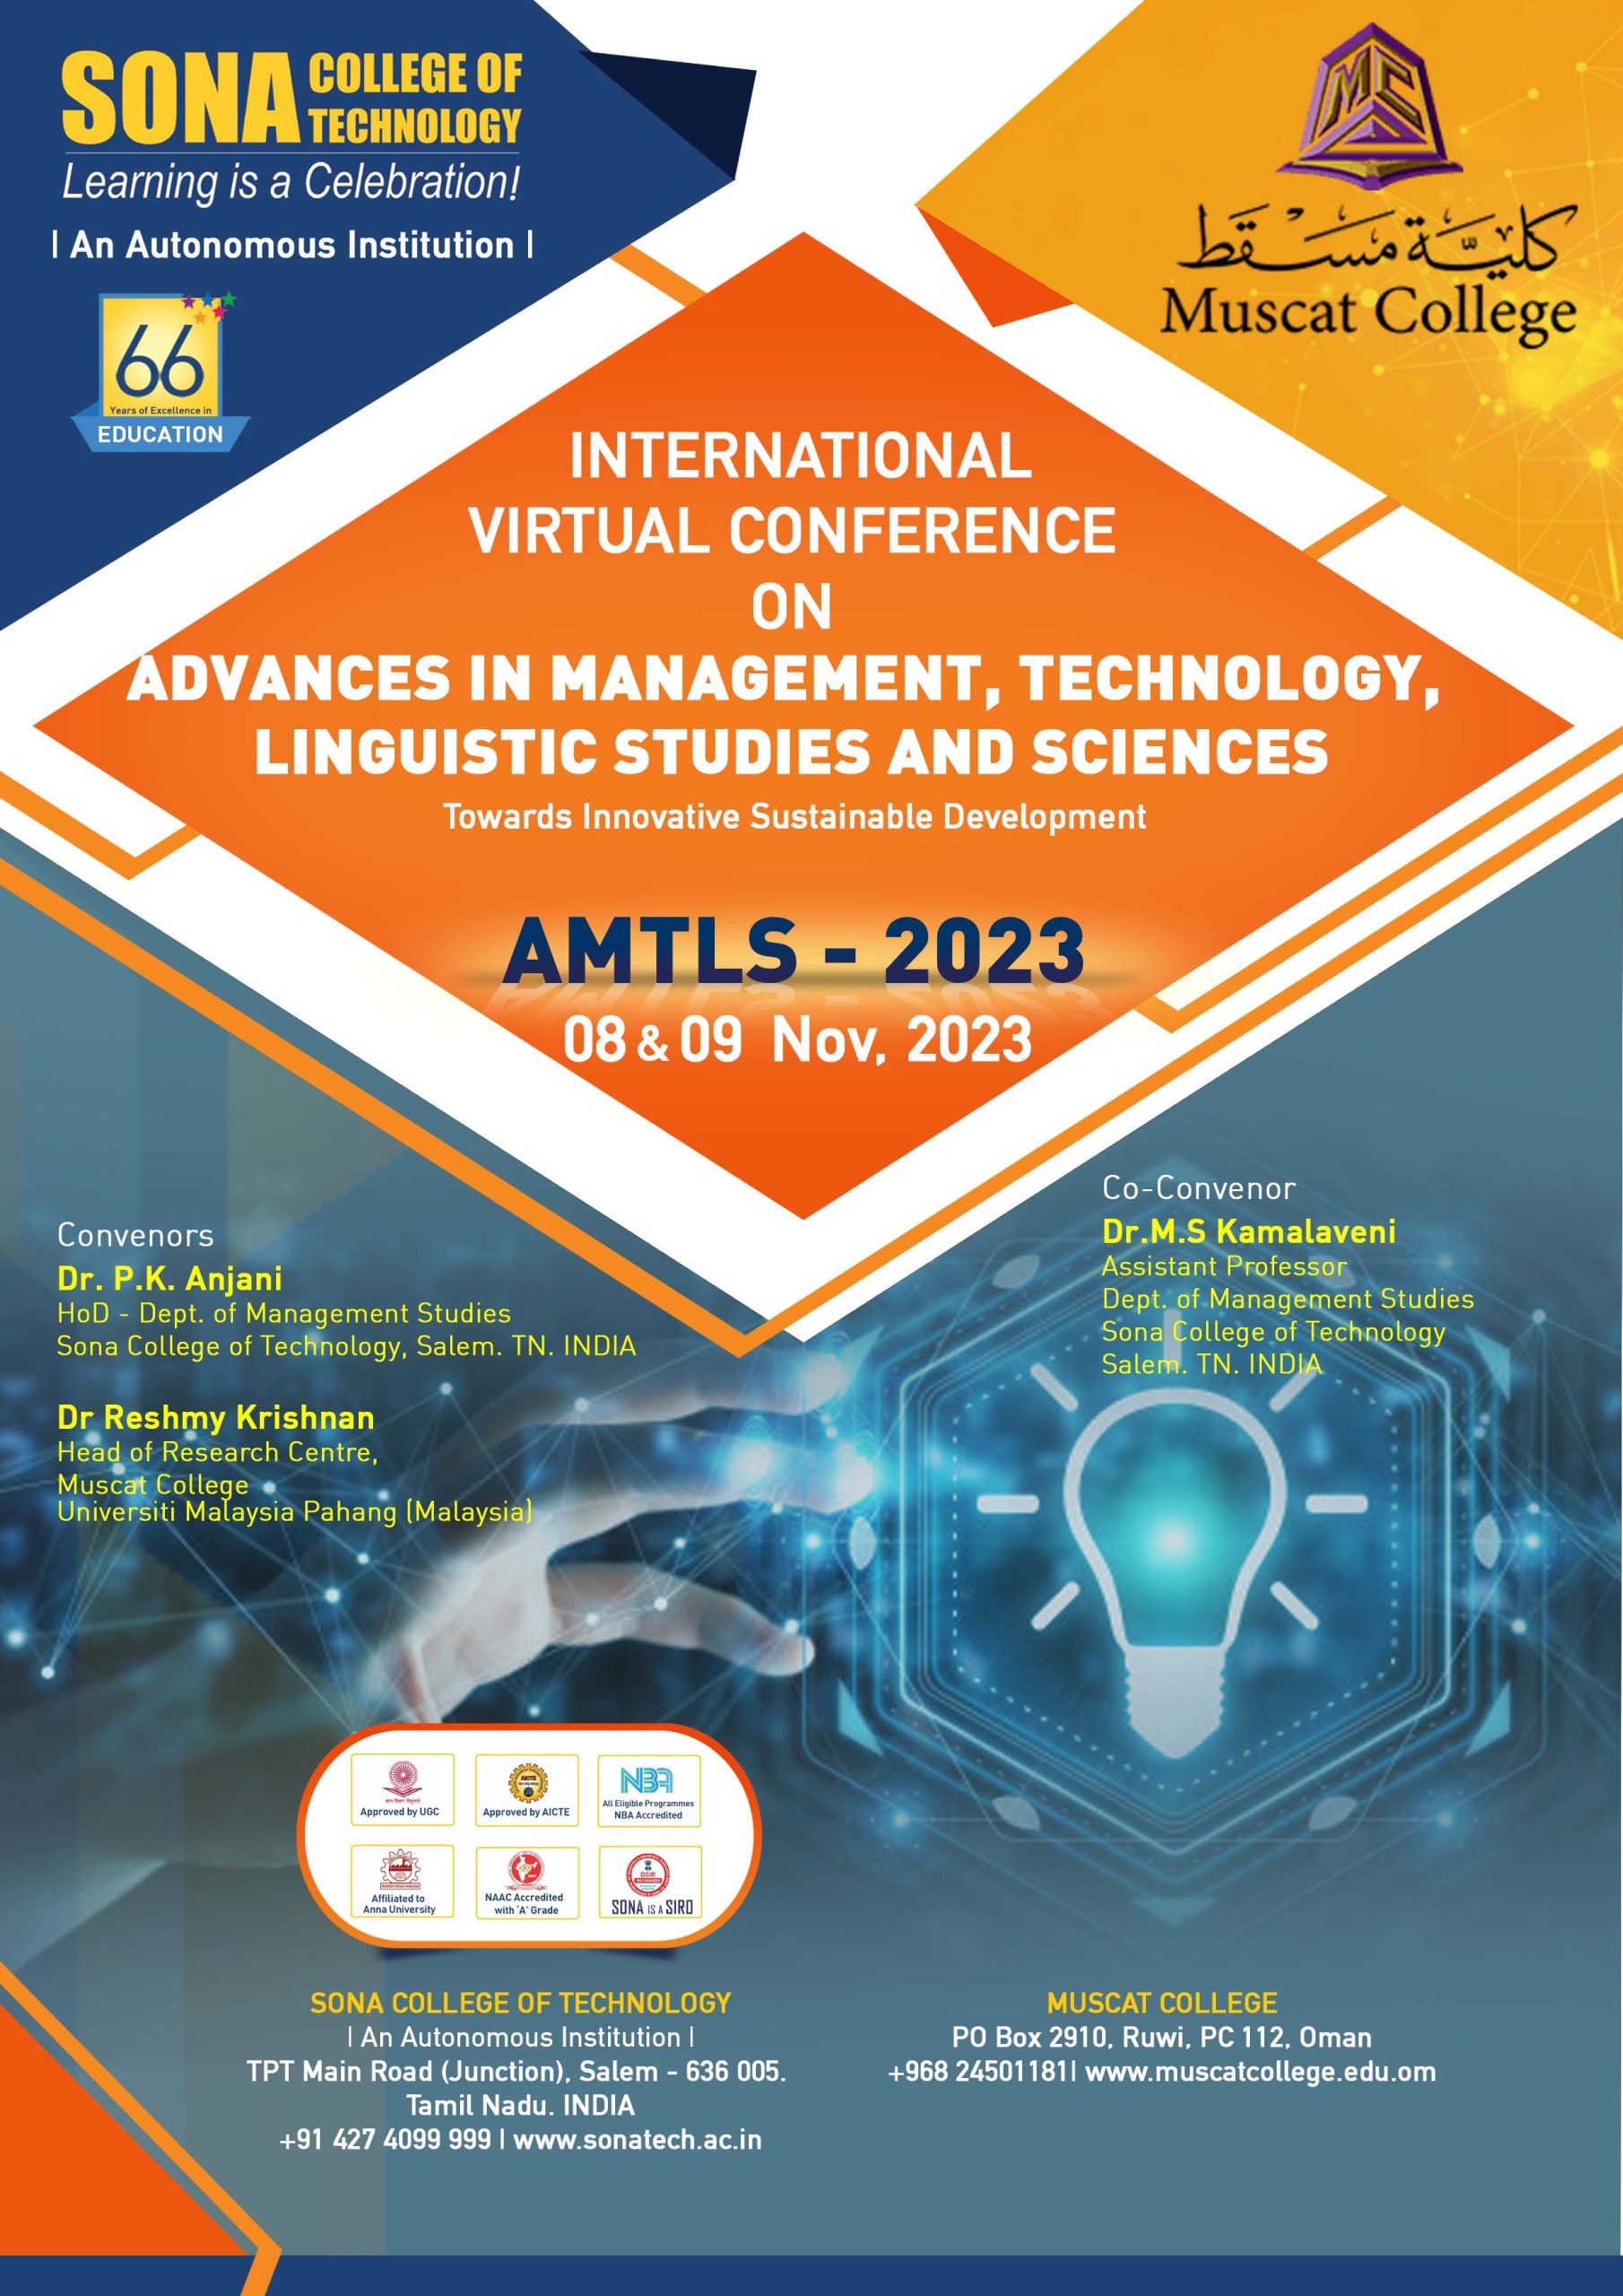 International Virtual Conference on Advances in Management, Technology, Linguistic Studies and Sciences